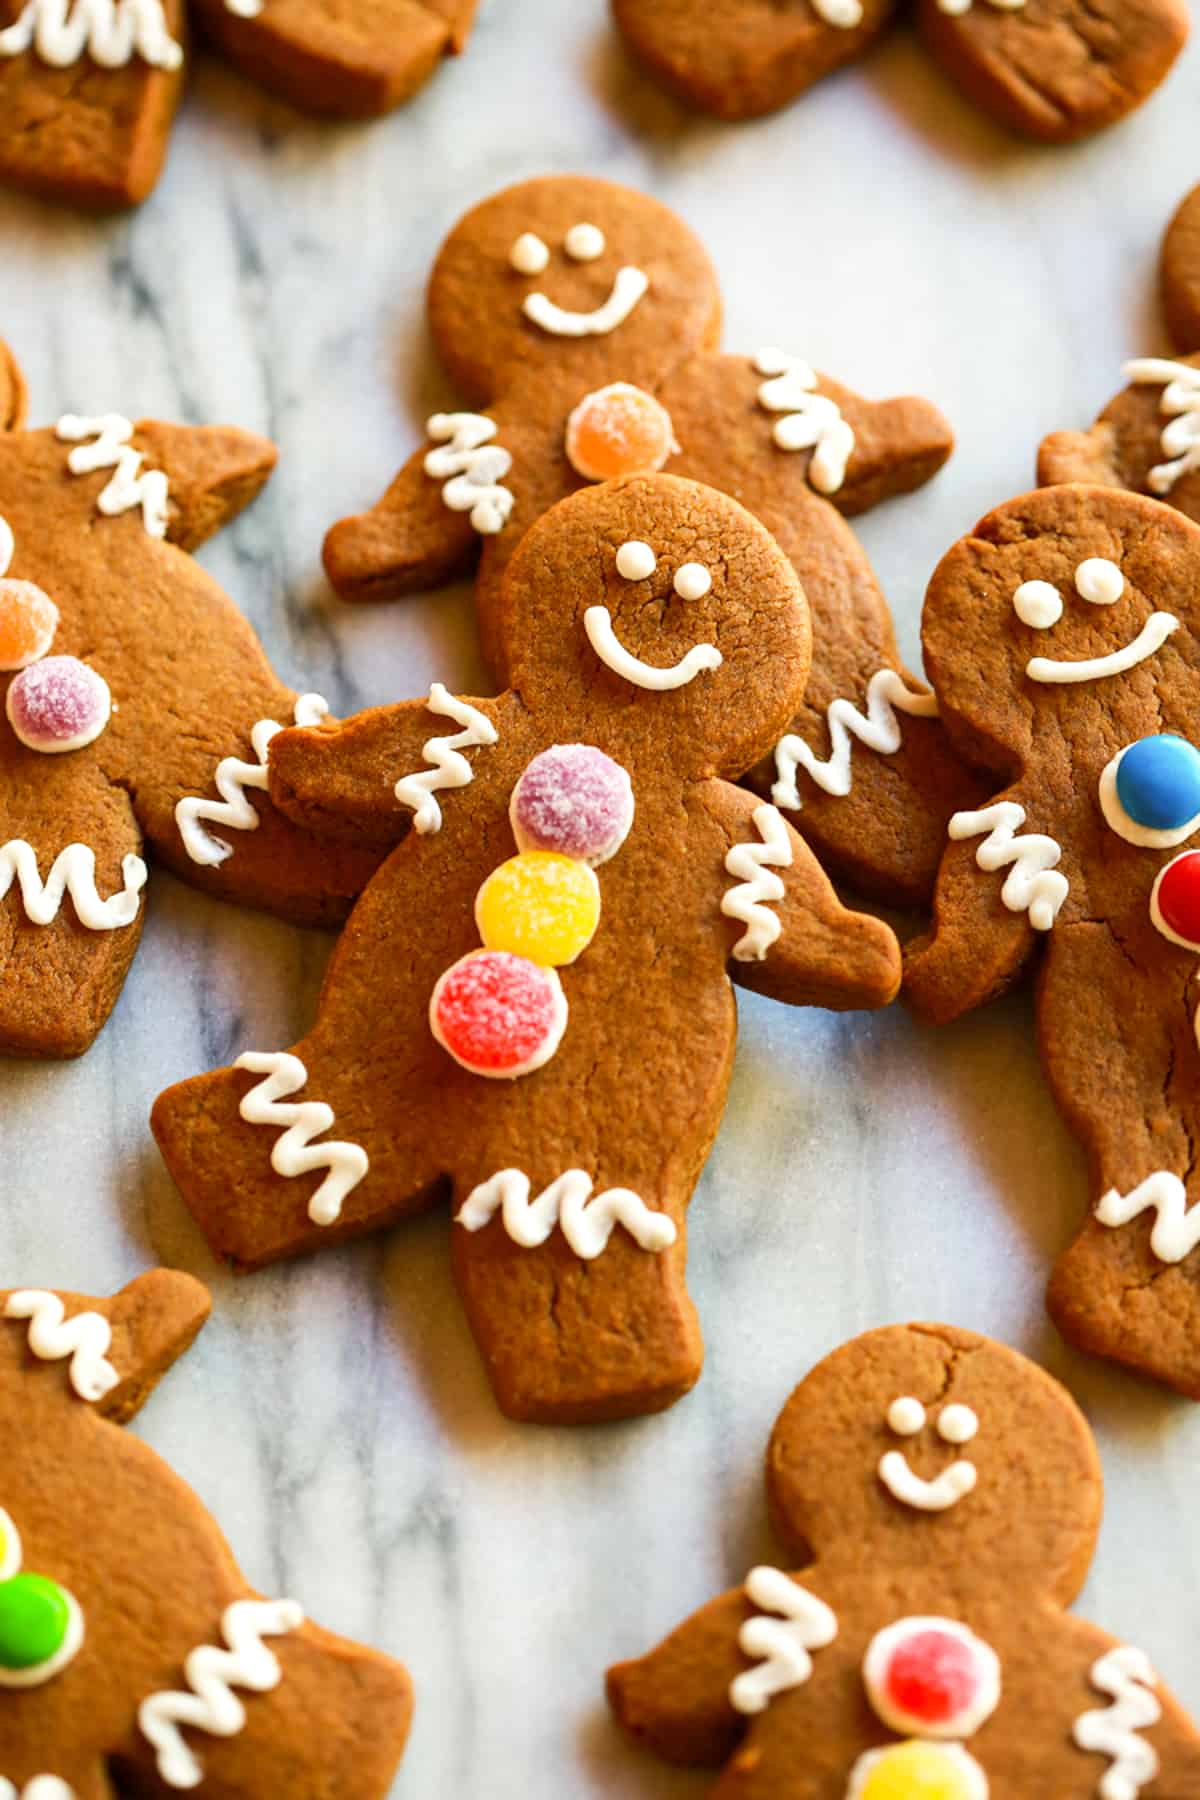 Homemade gingerbread men laying on a counter, ready to enjoy.